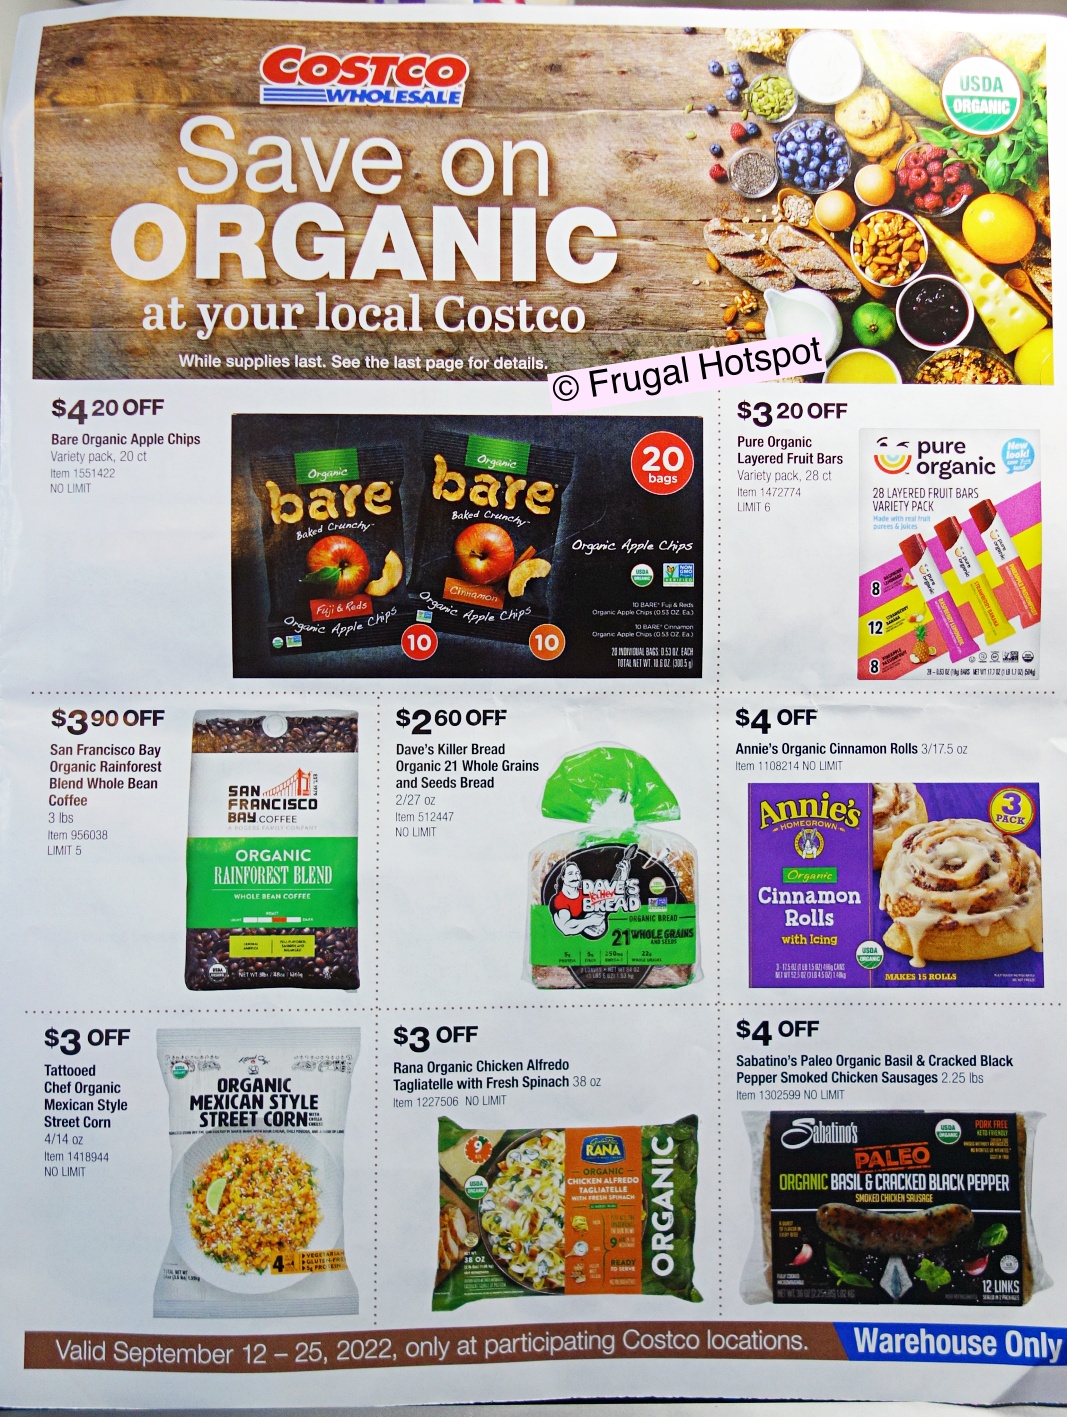 Costco Organic Coupon Book September 2022 | Page 1